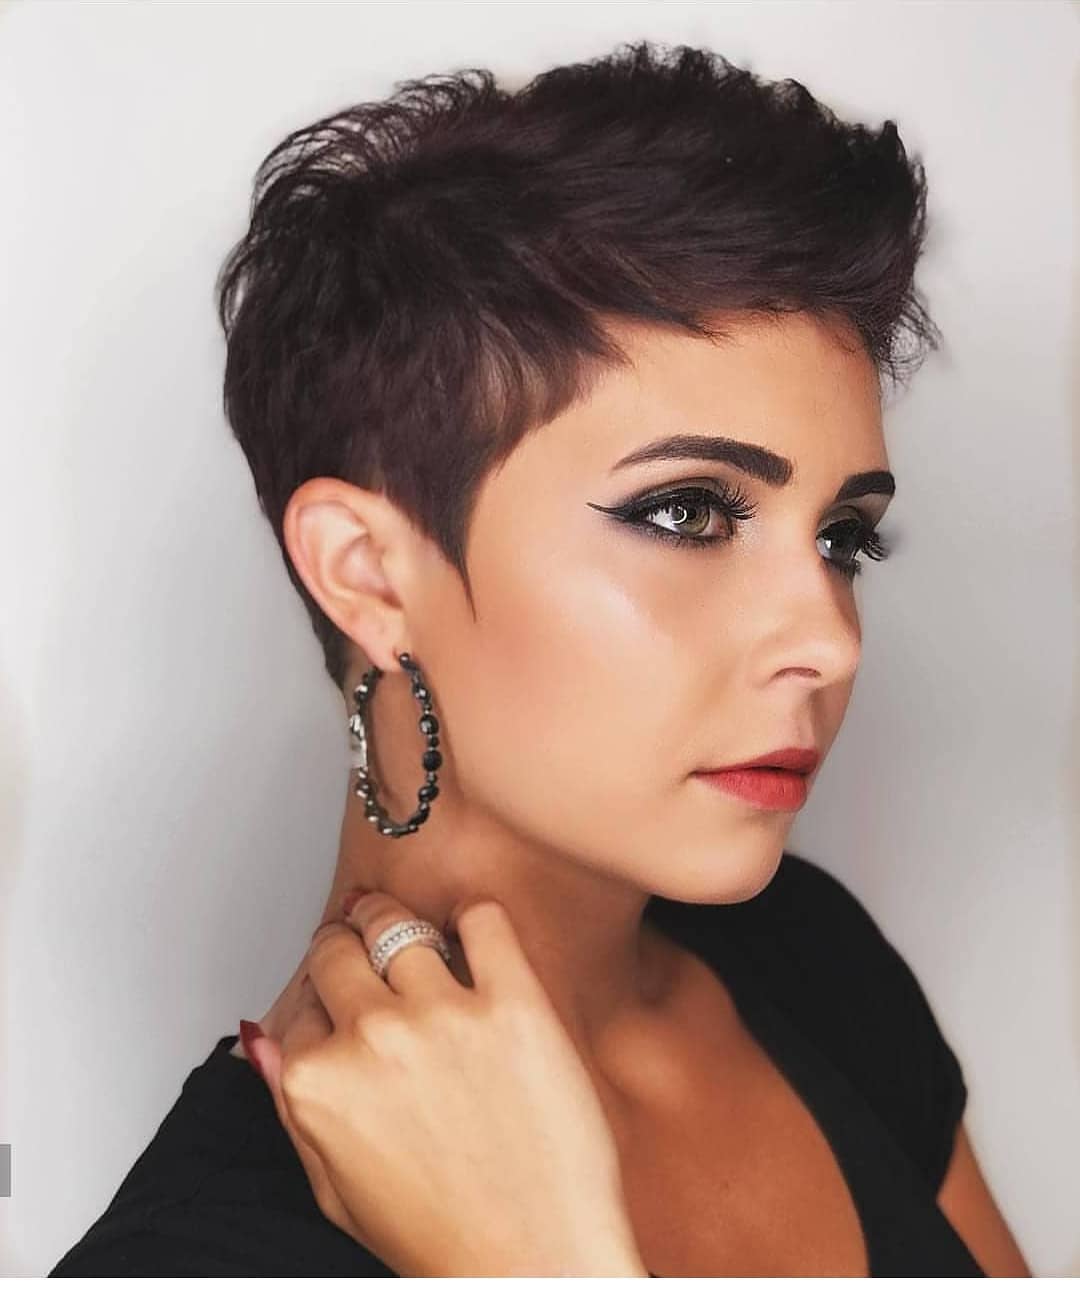 Easy Everyday Hairstyle for Short Hair - Women Pixie Haircut Ideas